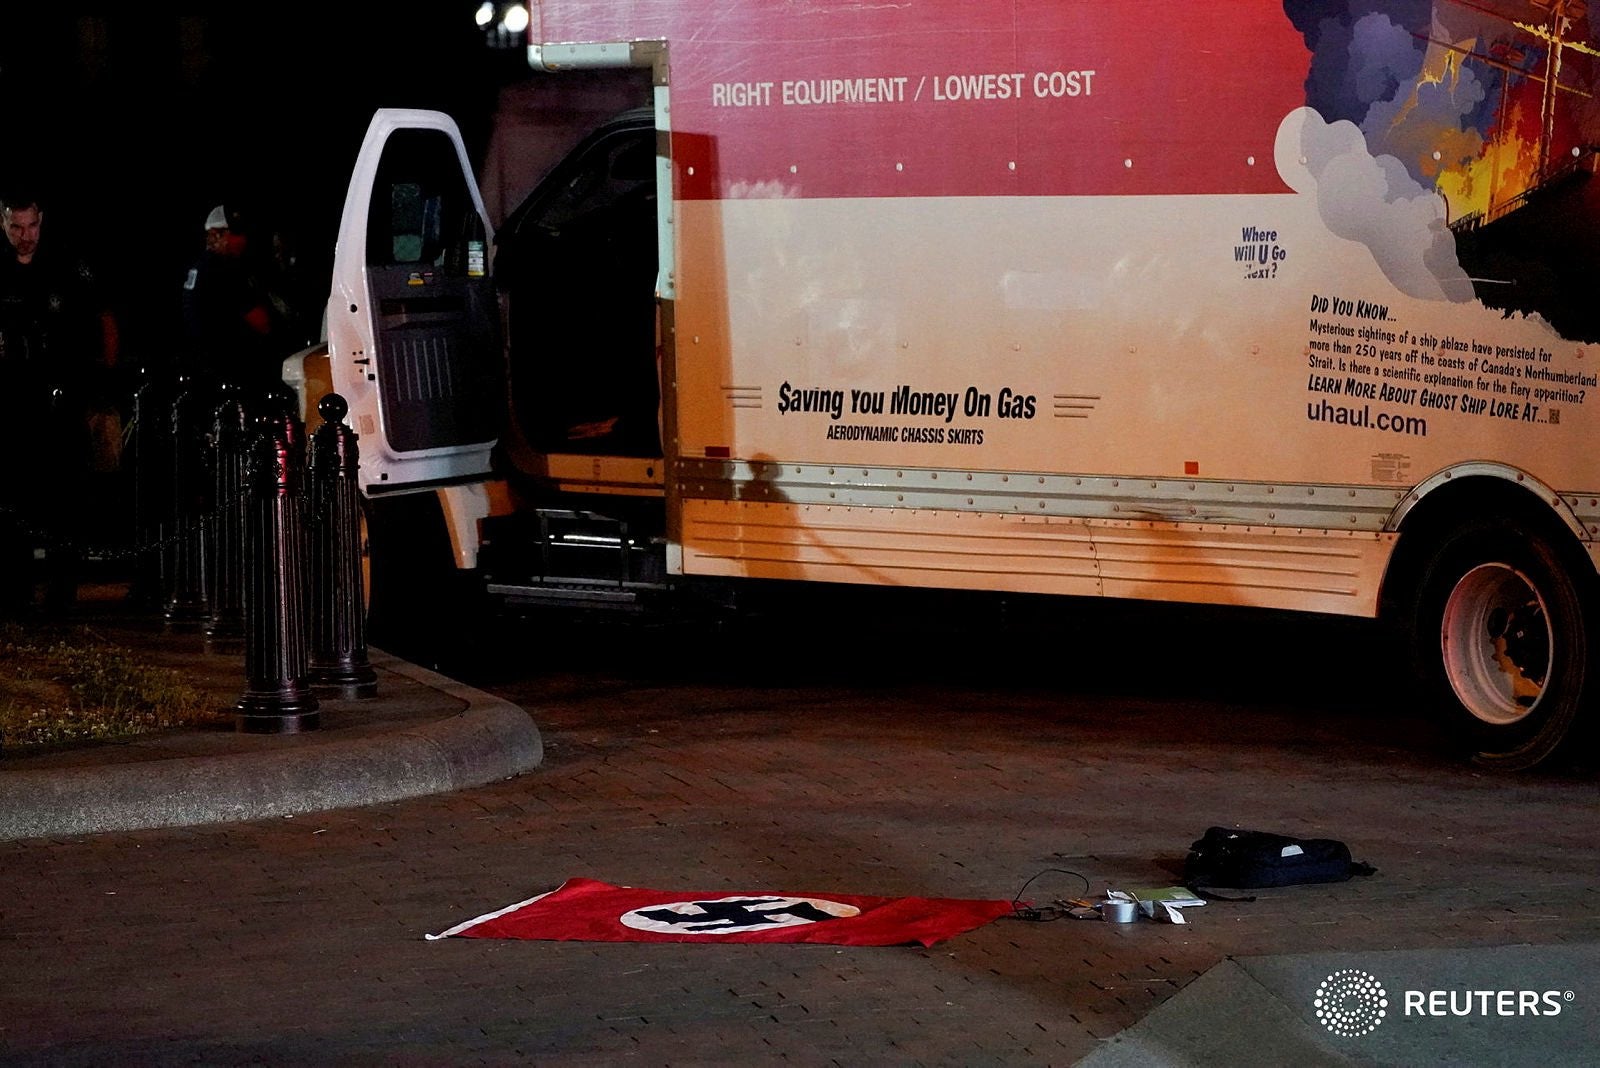 <p>A Nazi flag is seen on the ground outside the U-haul van </p>